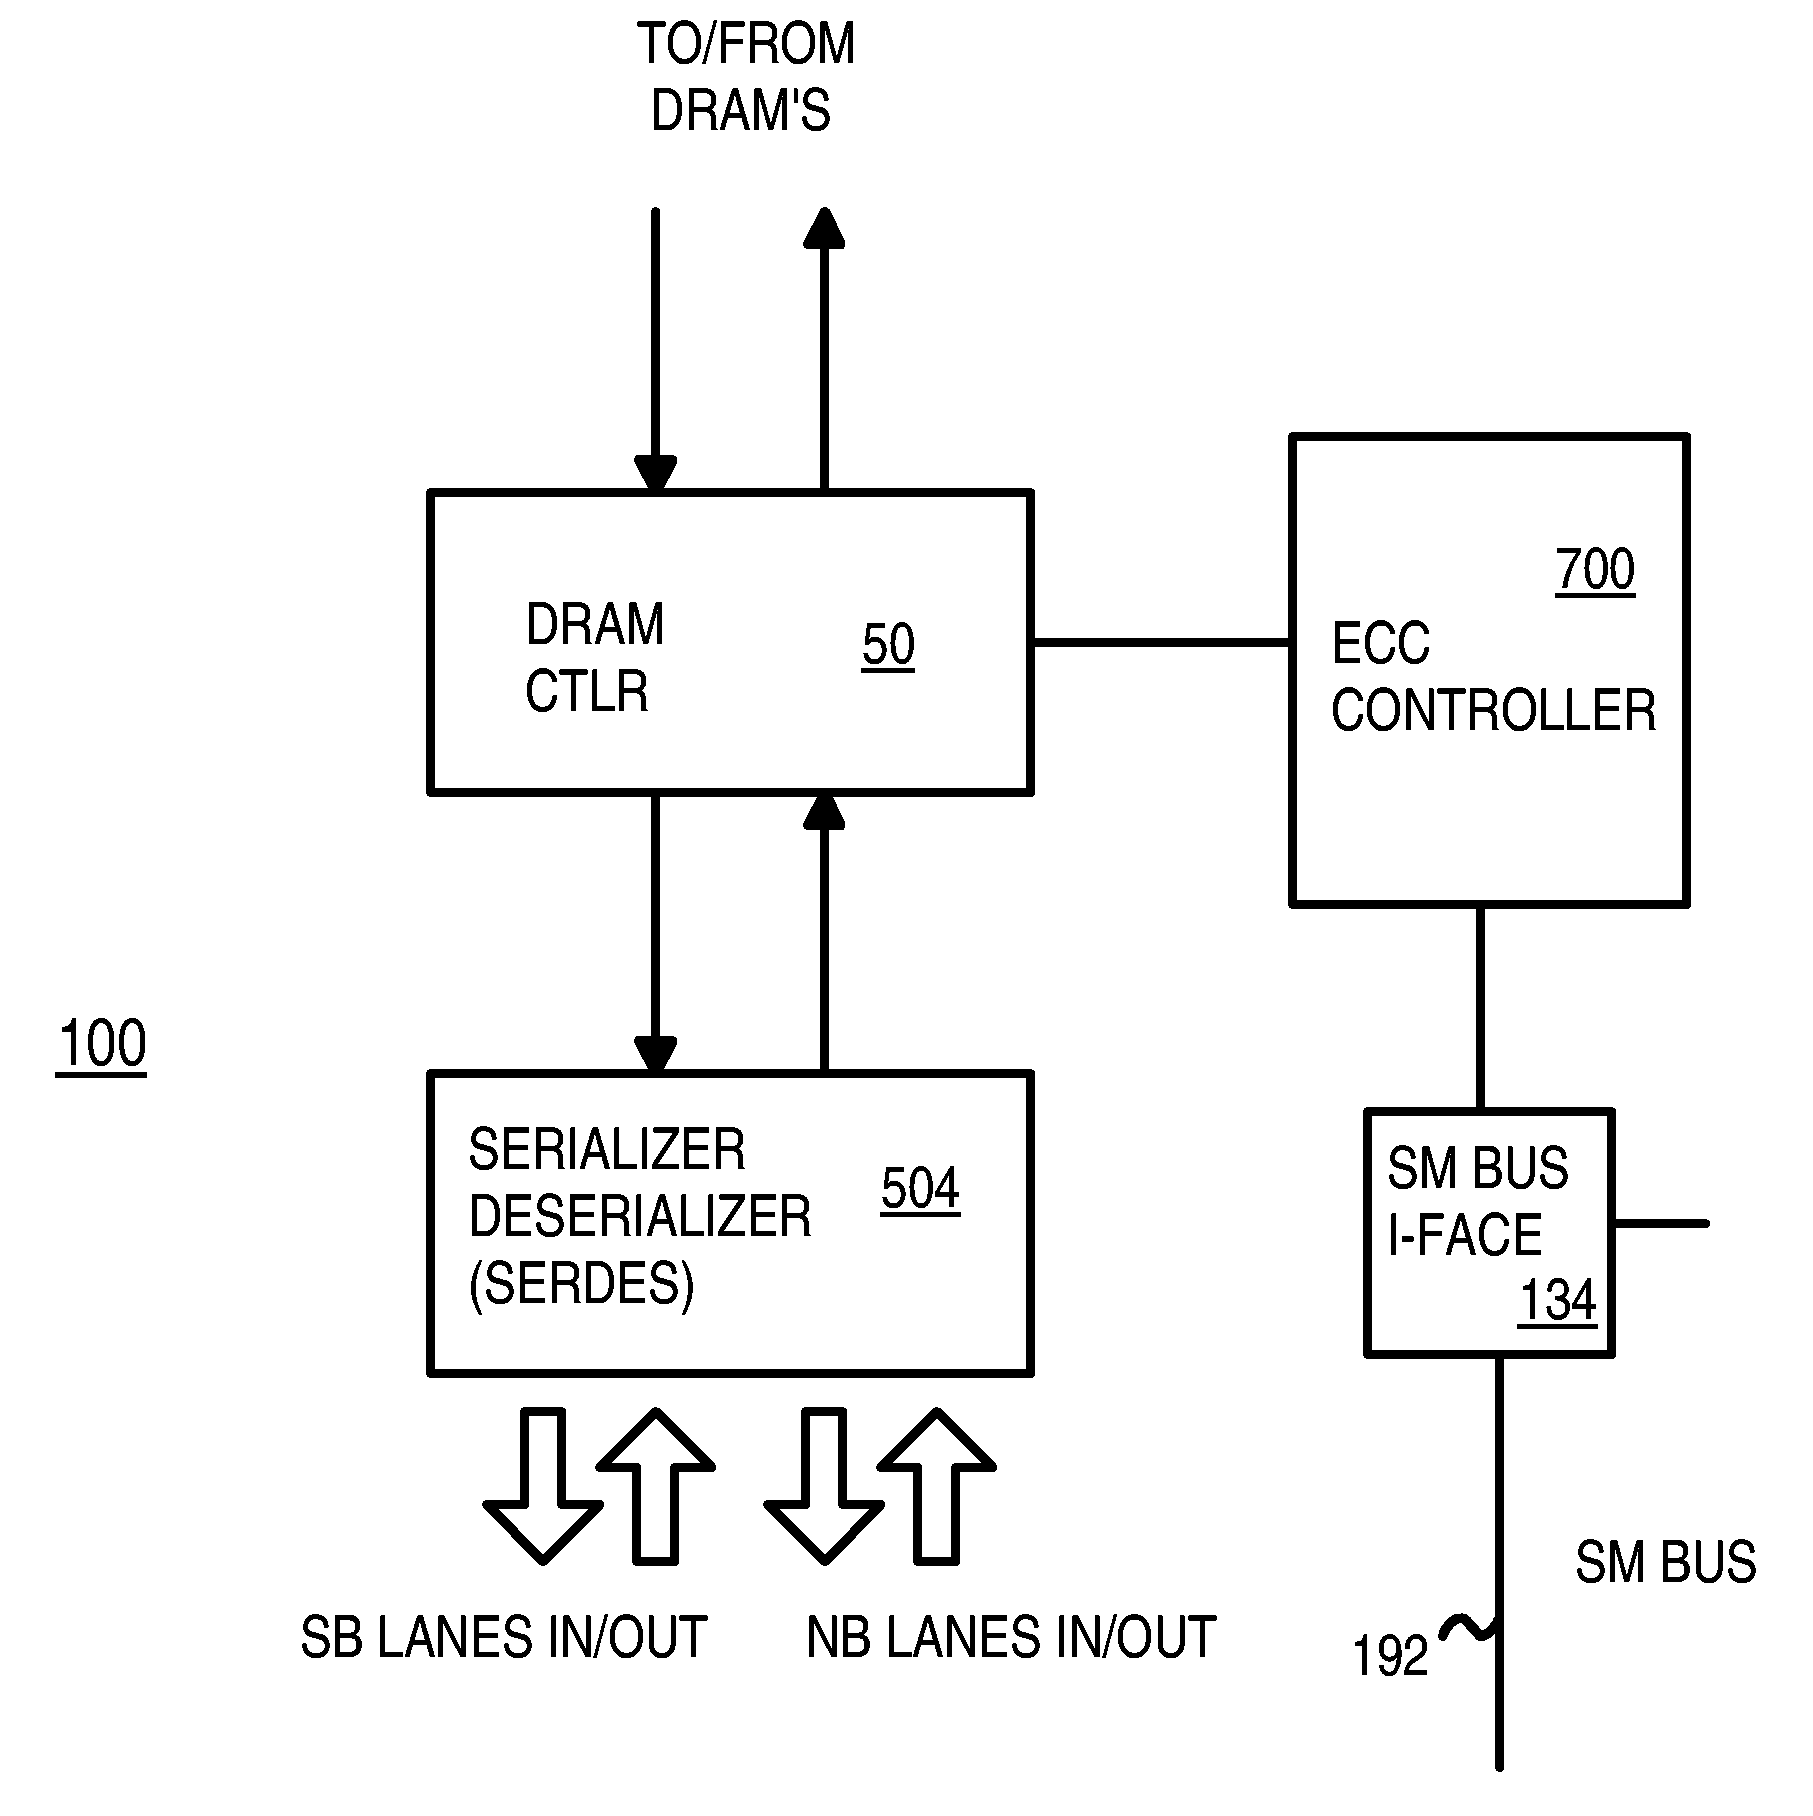 Fully-Buffered Memory-Module with Error-Correction Code (ECC) Controller in Serializing Advanced-Memory Buffer (AMB) that is transparent to Motherboard Memory Controller